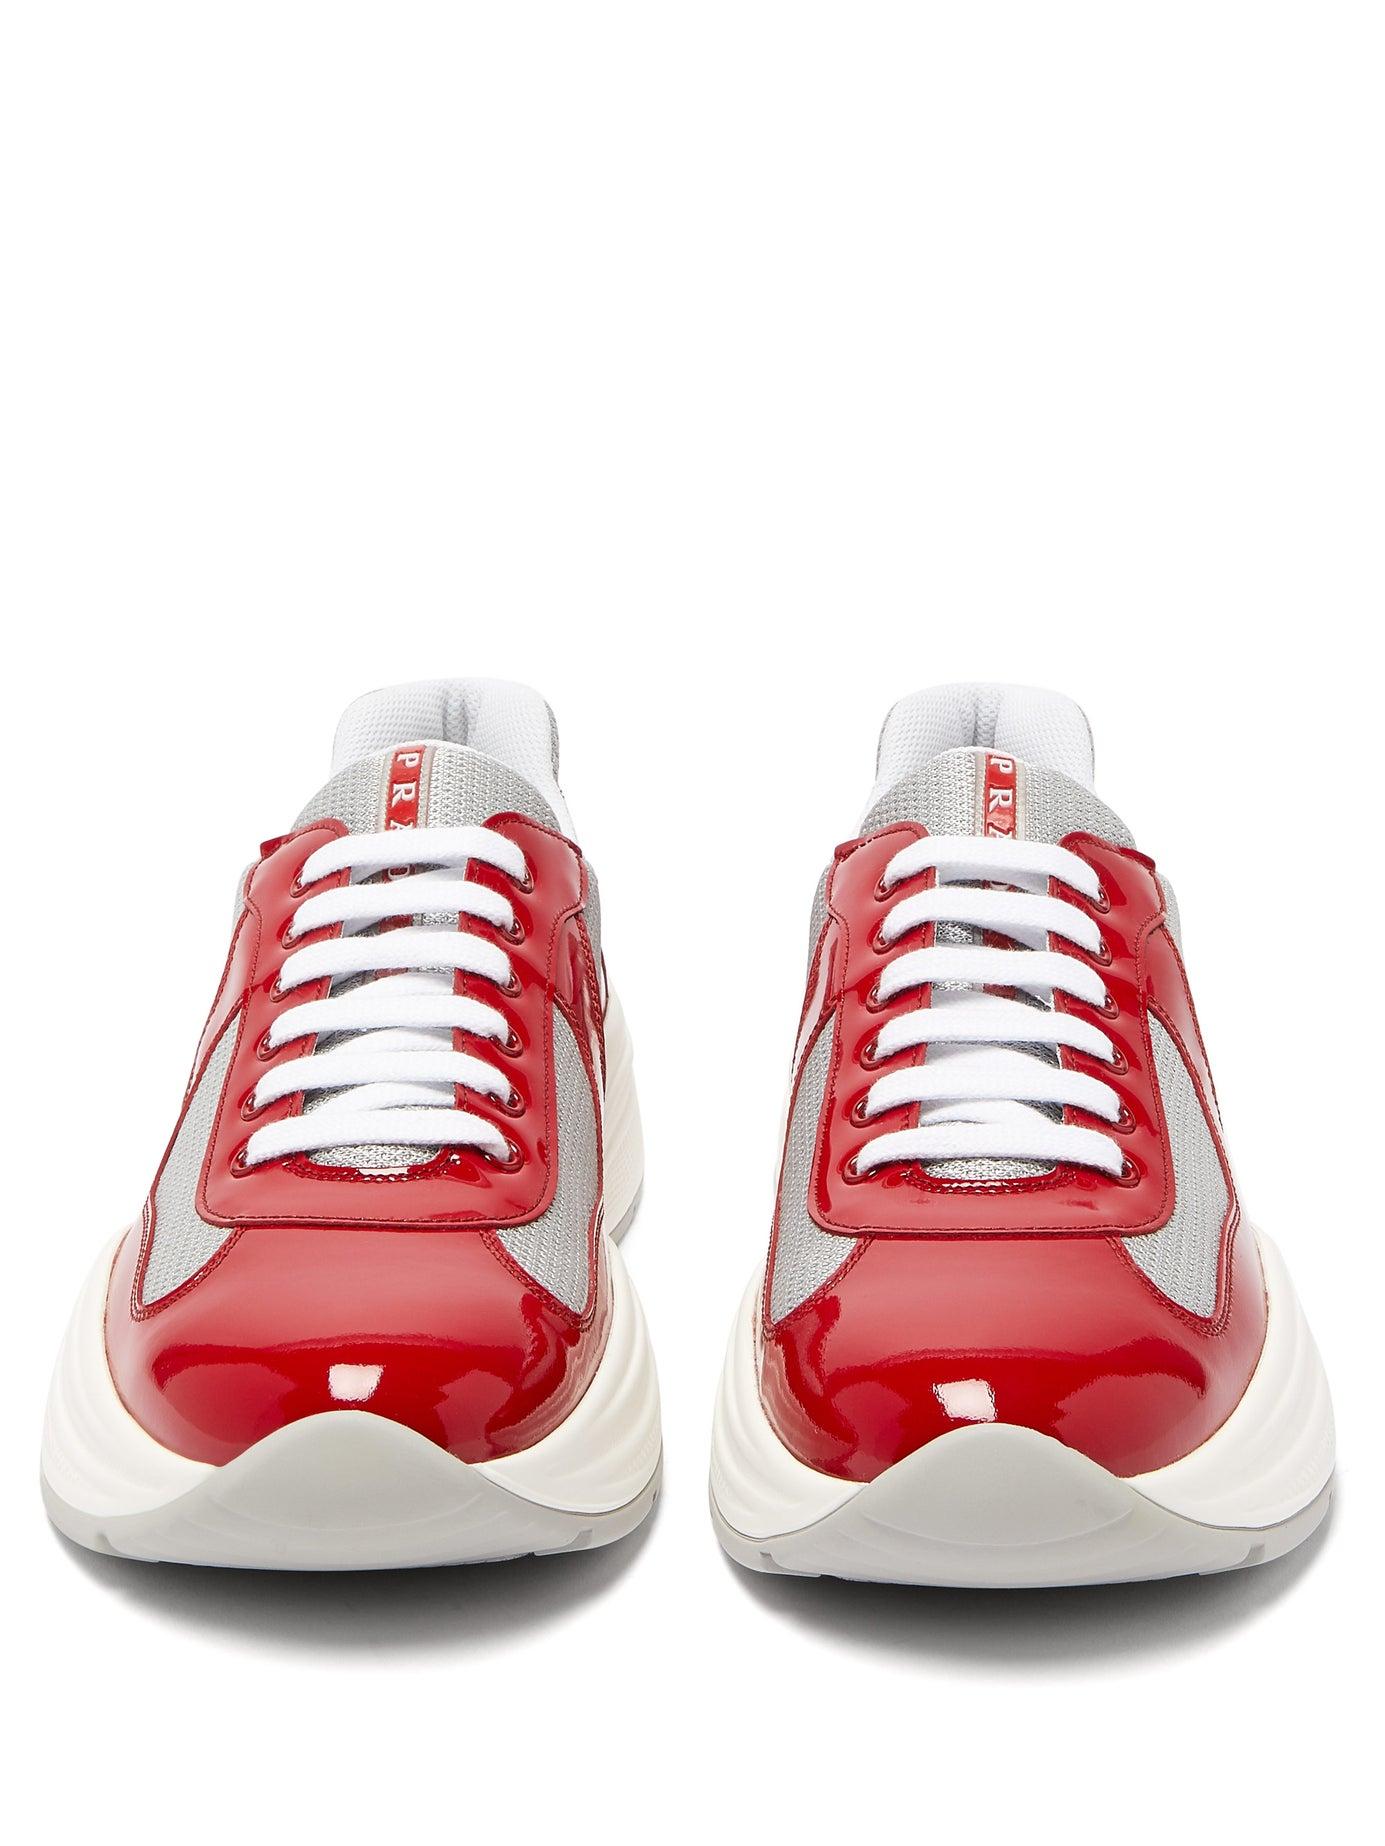 Prada Men's Shoes Leather Trainers Sneakers in Red for Men | Lyst